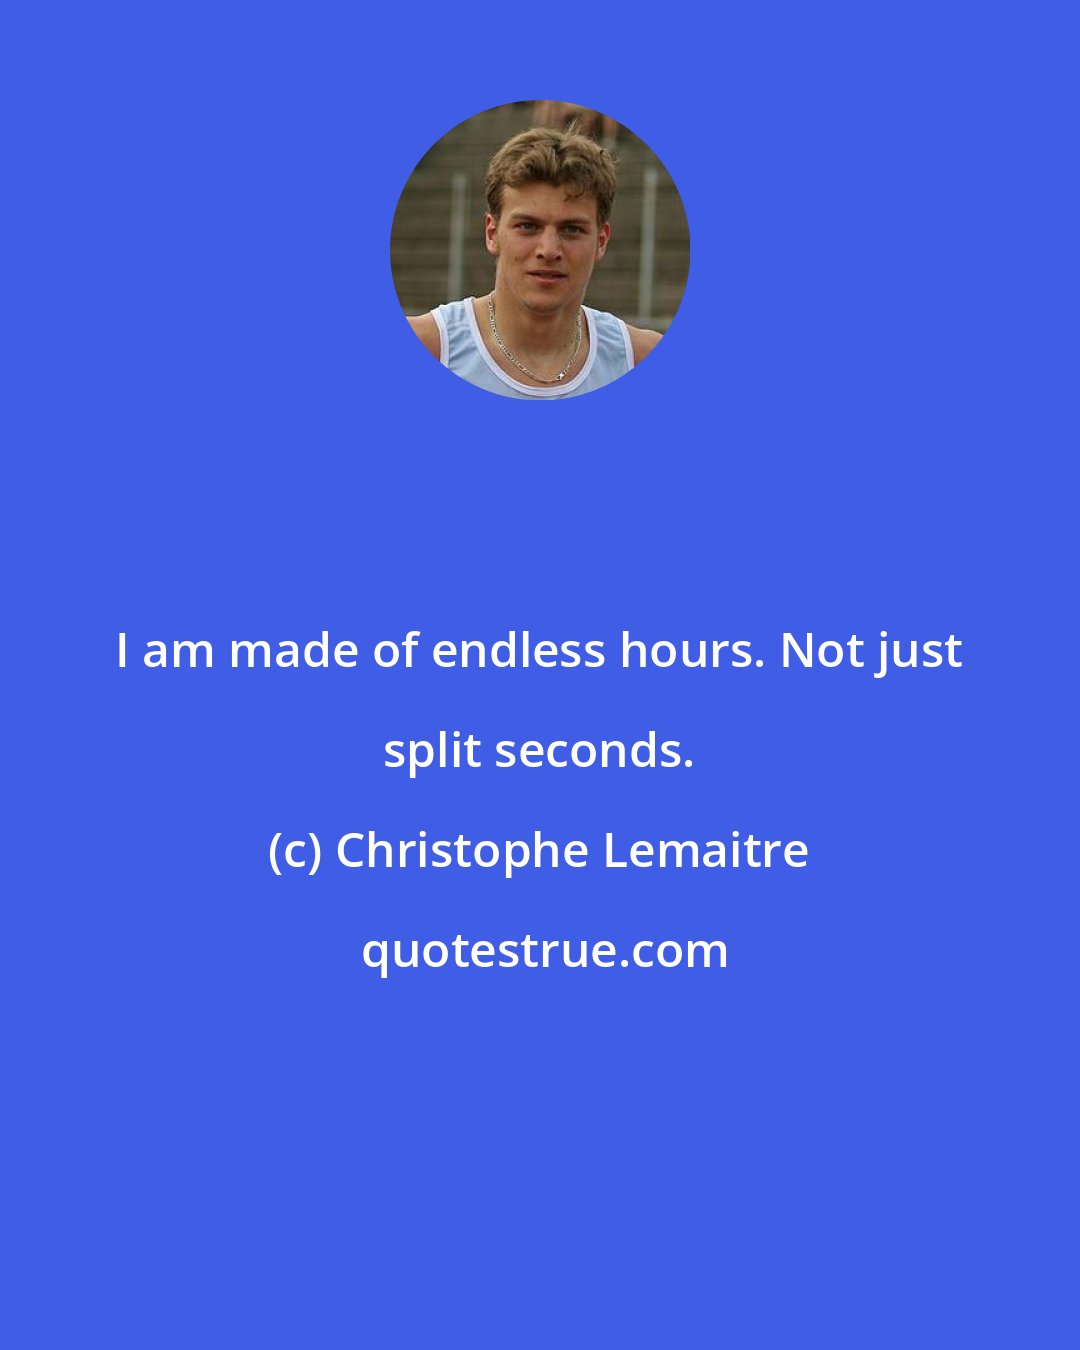 Christophe Lemaitre: I am made of endless hours. Not just split seconds.